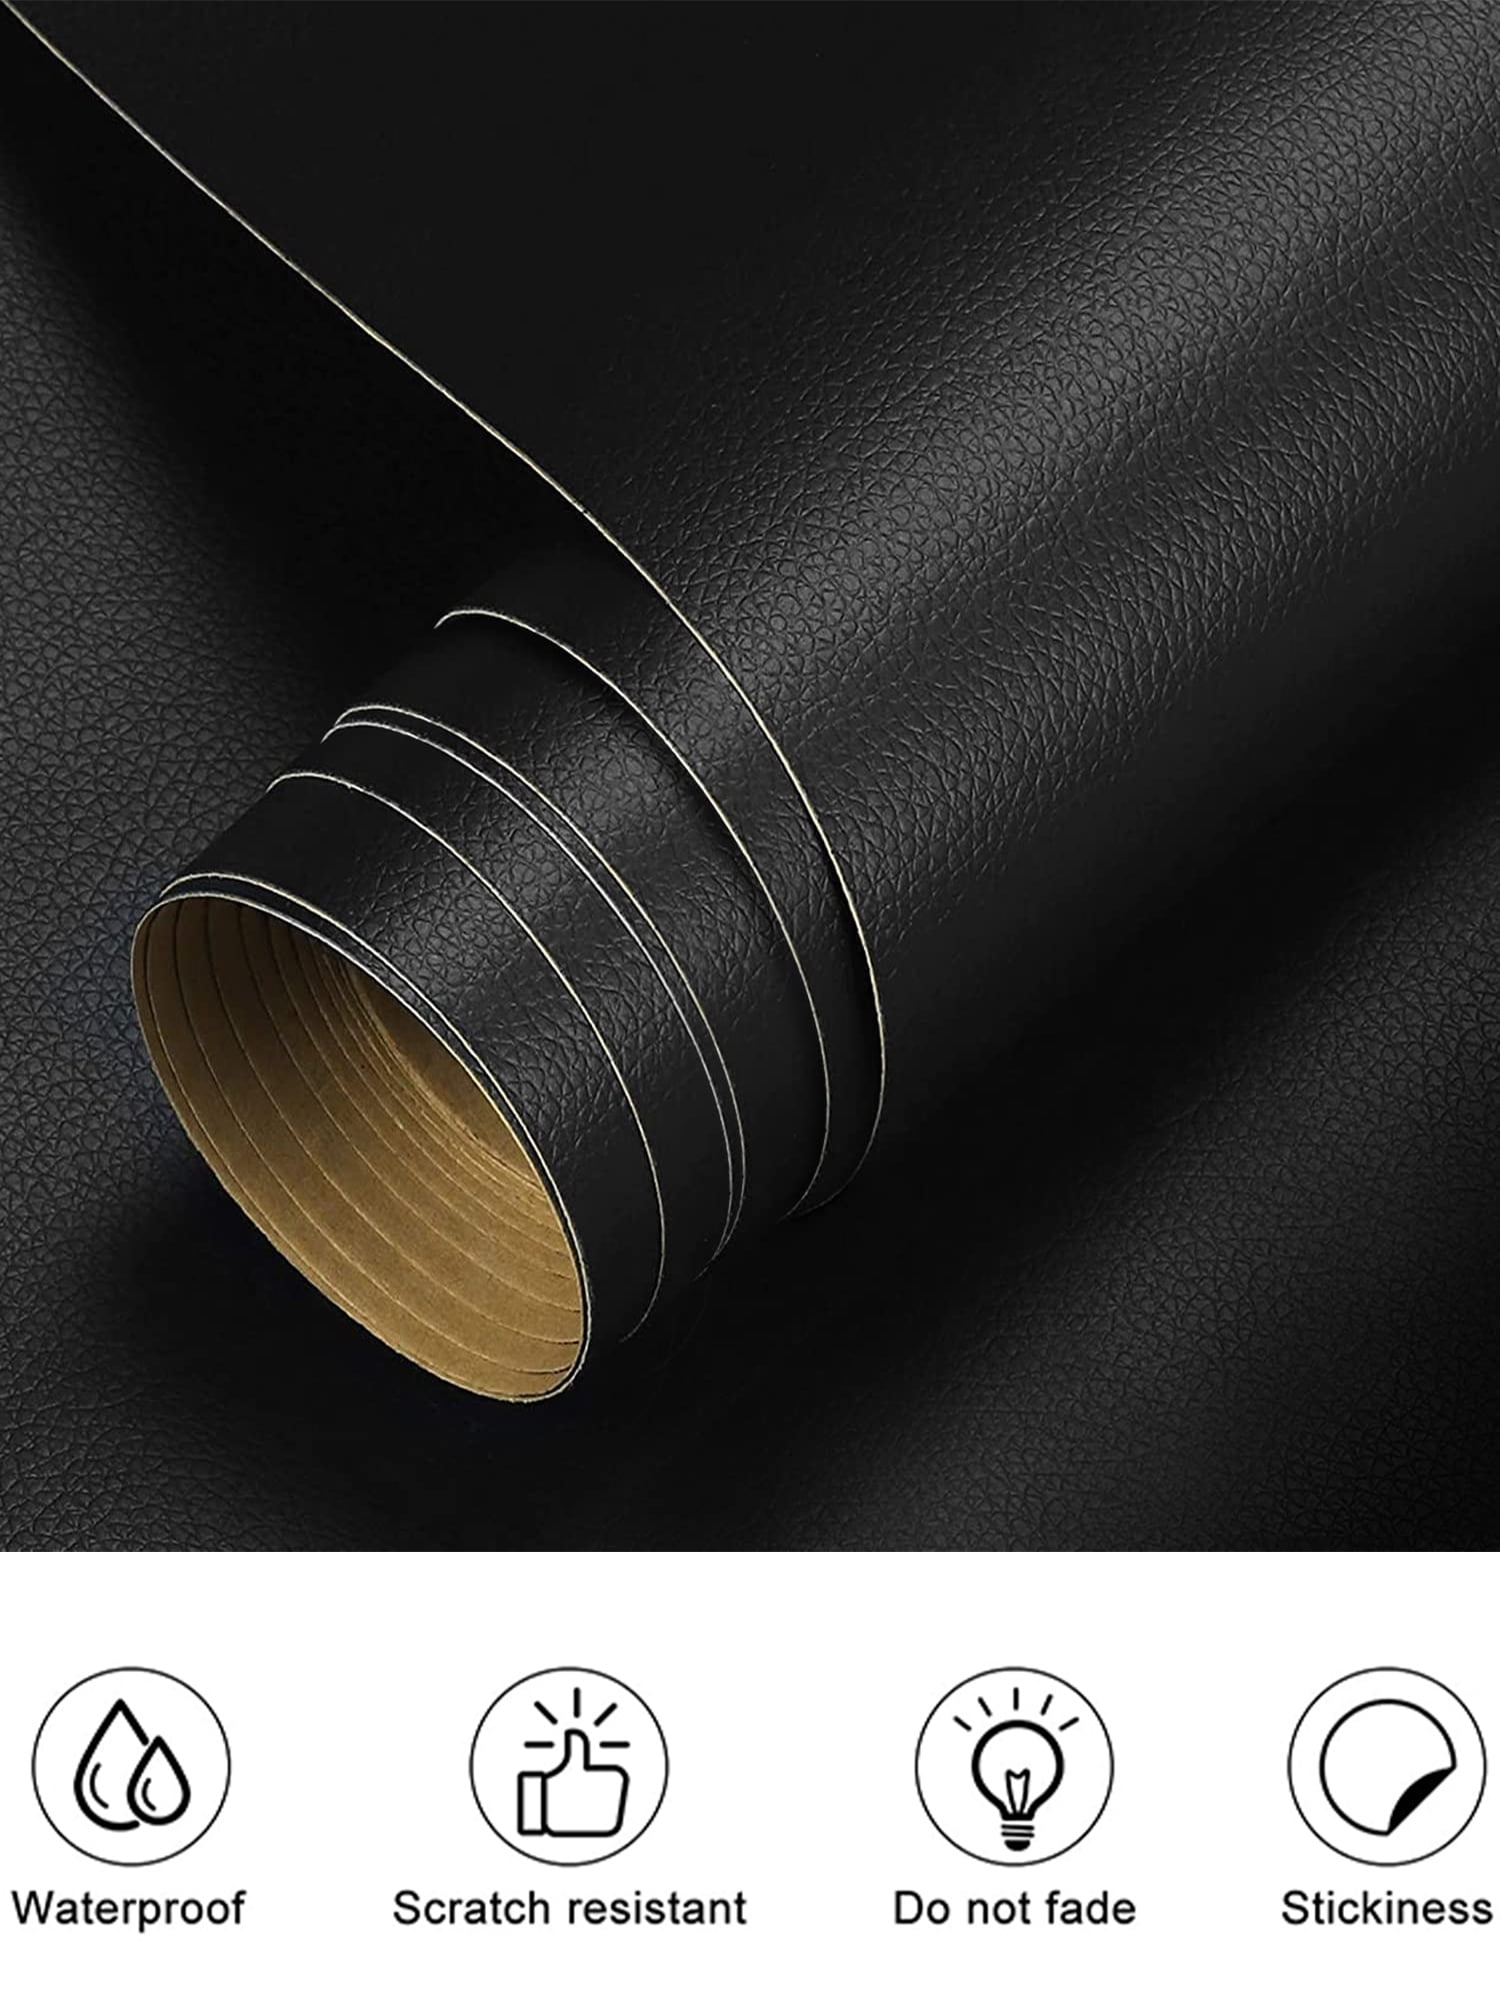 35*137cm Self-adhesive Pu Leather Repair Patch, Sofa Repair Tape, Pu  Leather Repair Kit, Textured Faux Litchi Grain Self-adhesive Pu Leather  Roll, Scratch-resistant, Water-resistant, Wear-resistant, Diy Pu Leather  Repair Patch For Use On